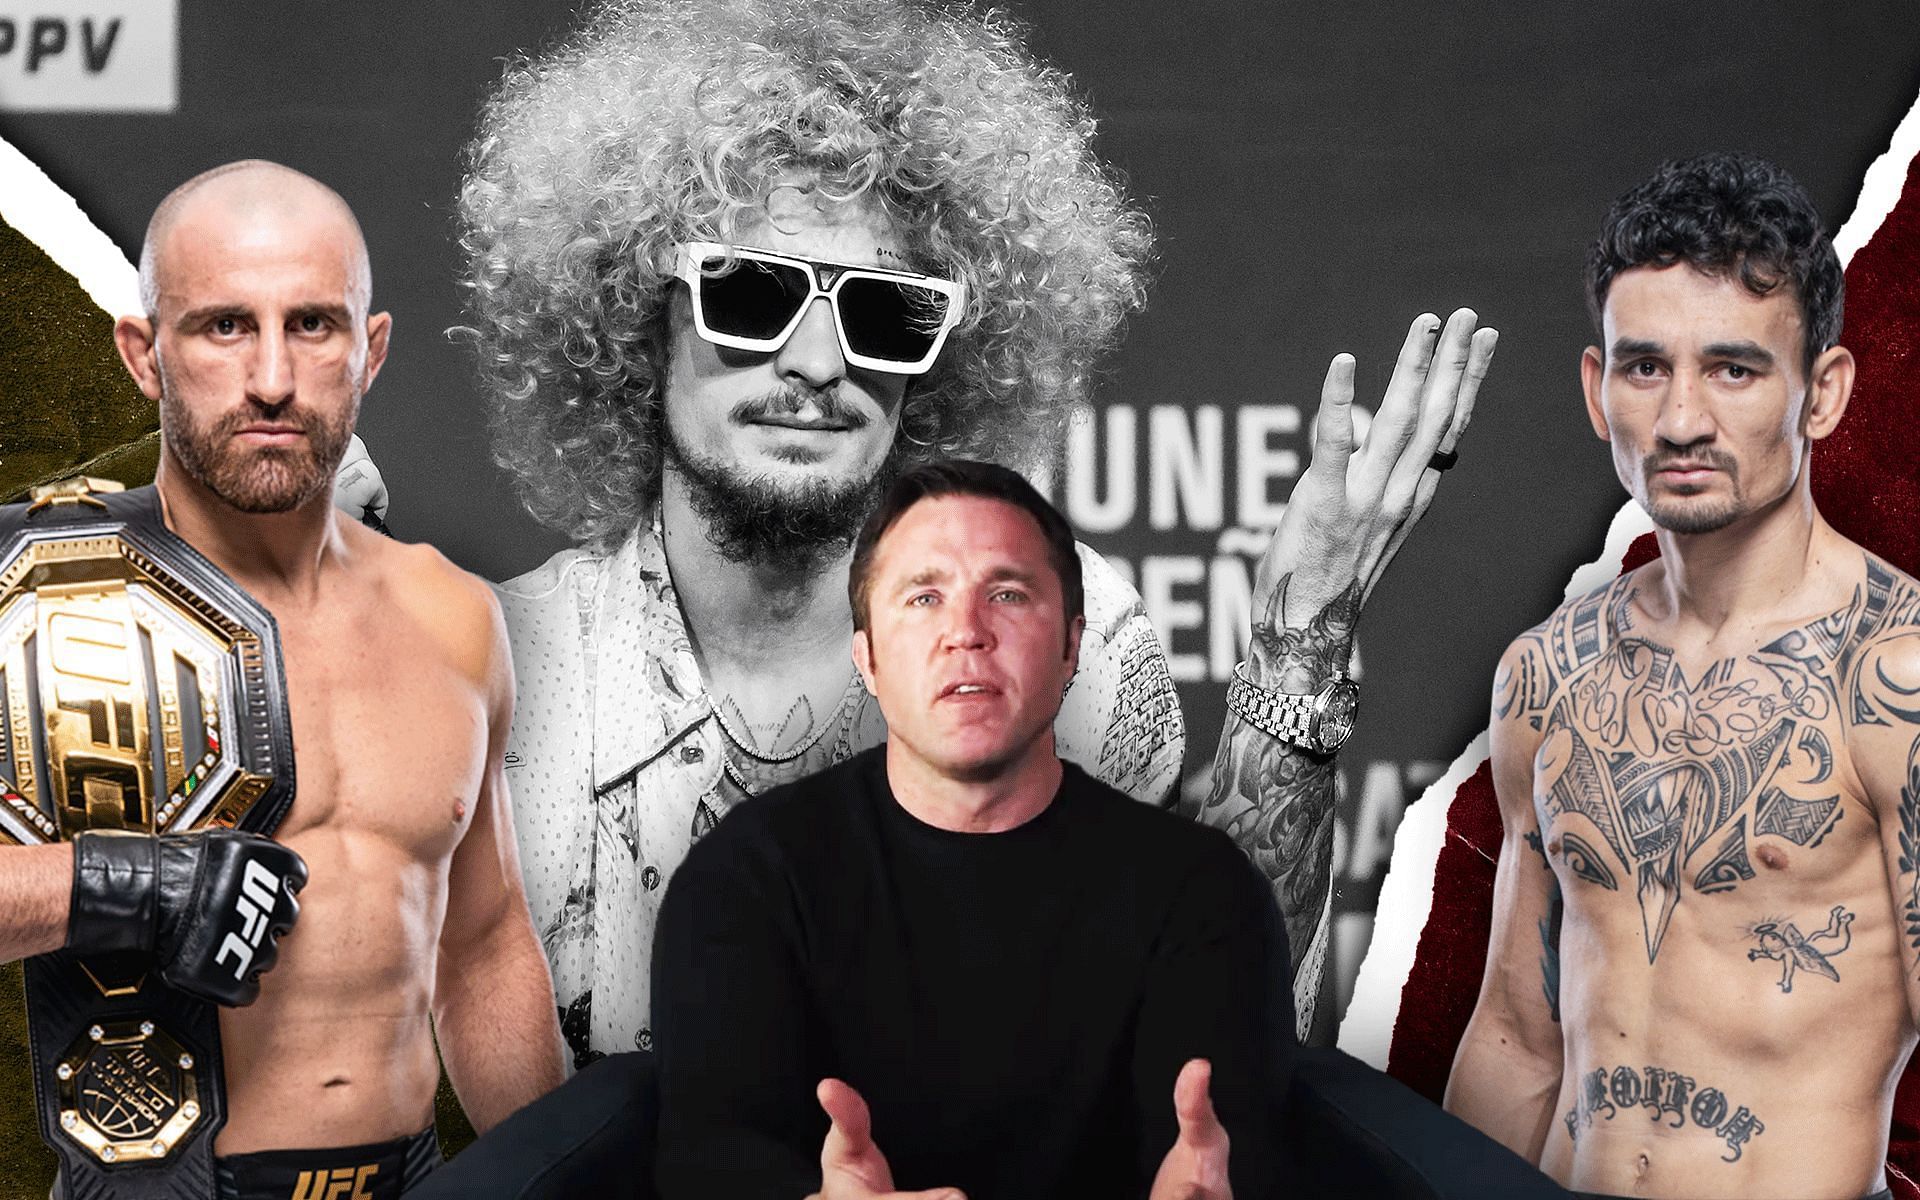 Chael Sonnen weighs in on Sean O&#039;Malley&#039;s recent comments about Max Holloway [Volkanovski and Holloway images courtesy - ufc.com; Sonnen image via Chael Sonnen on YouTube; O&#039;Malley image via Getty]